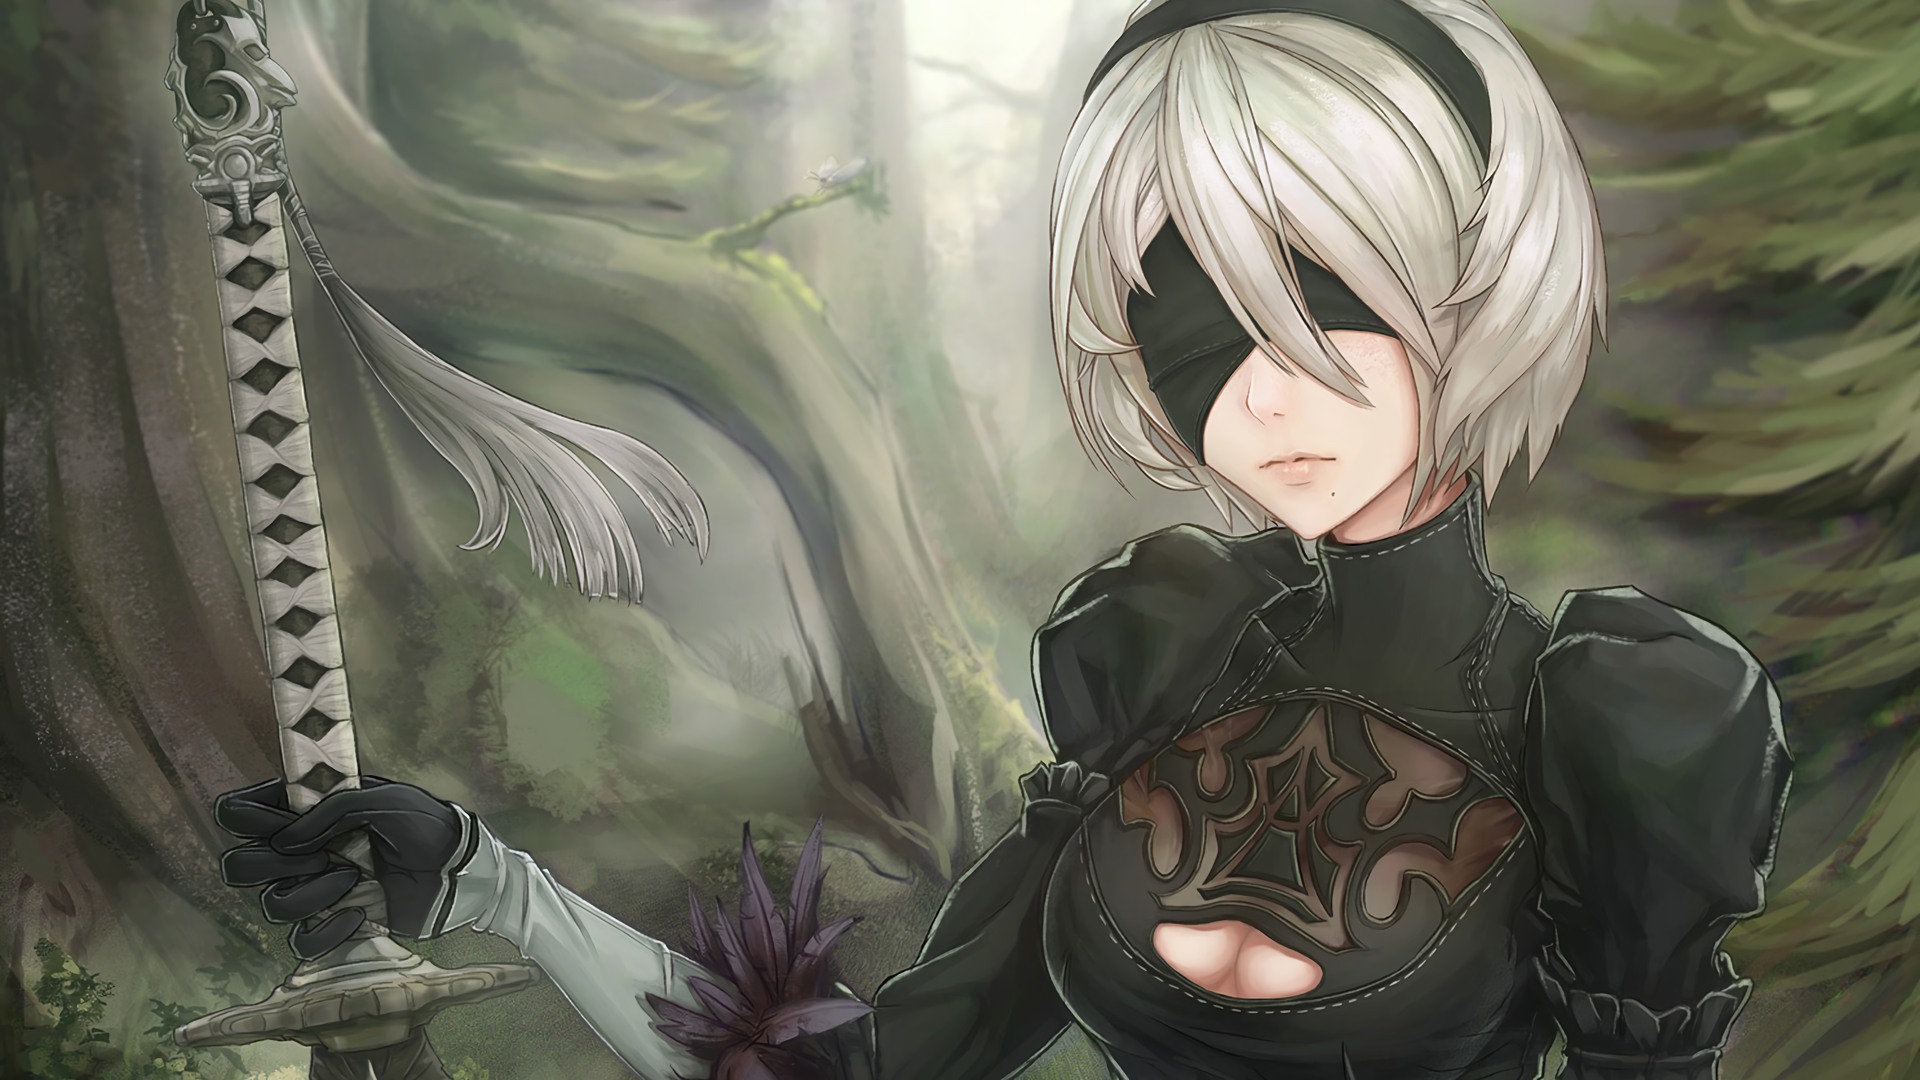 Free Download Nier Automata Wallpapers Hd What We Already Know 19x1080 For Your Desktop Mobile Tablet Explore 70 Nier Wallpaper Nier Wallpaper Nier Replicant Wallpaper Nier Automata Wallpapers